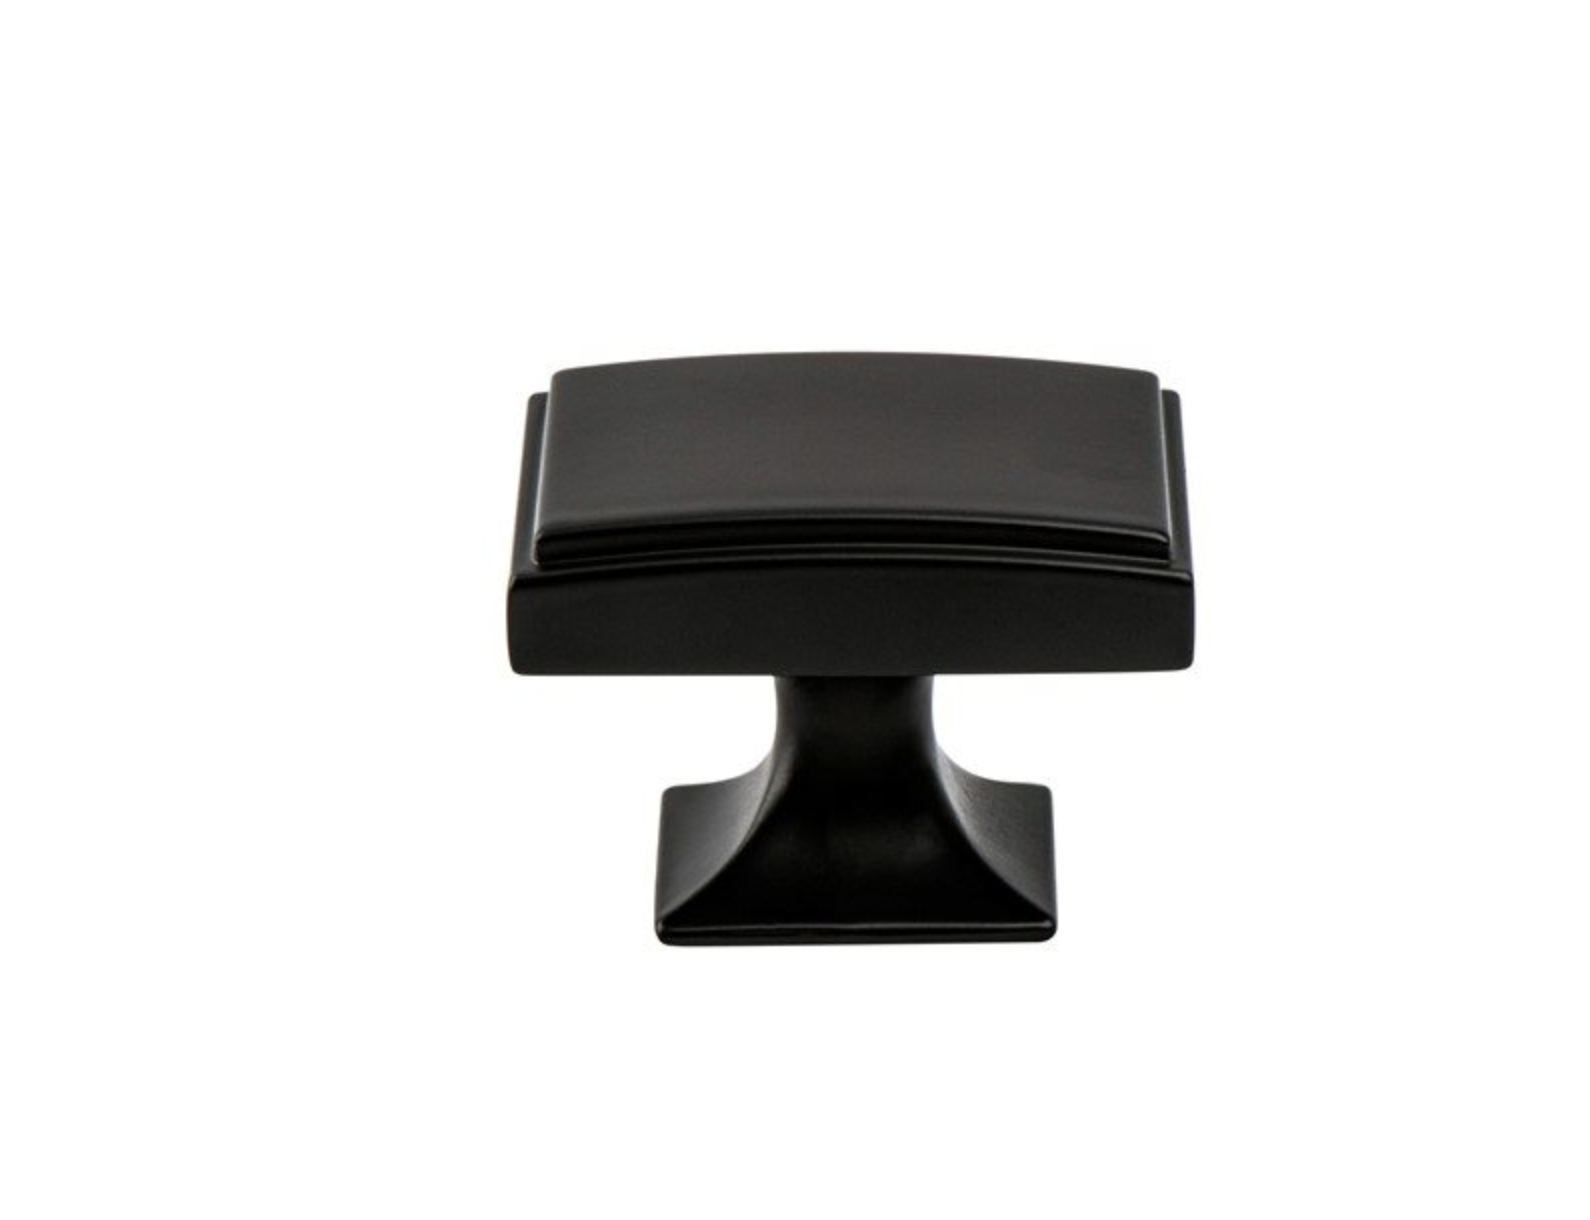 Matte Black "Liana" Drawer Pulls and Knobs for Cabinets and Furniture - Industry Hardware